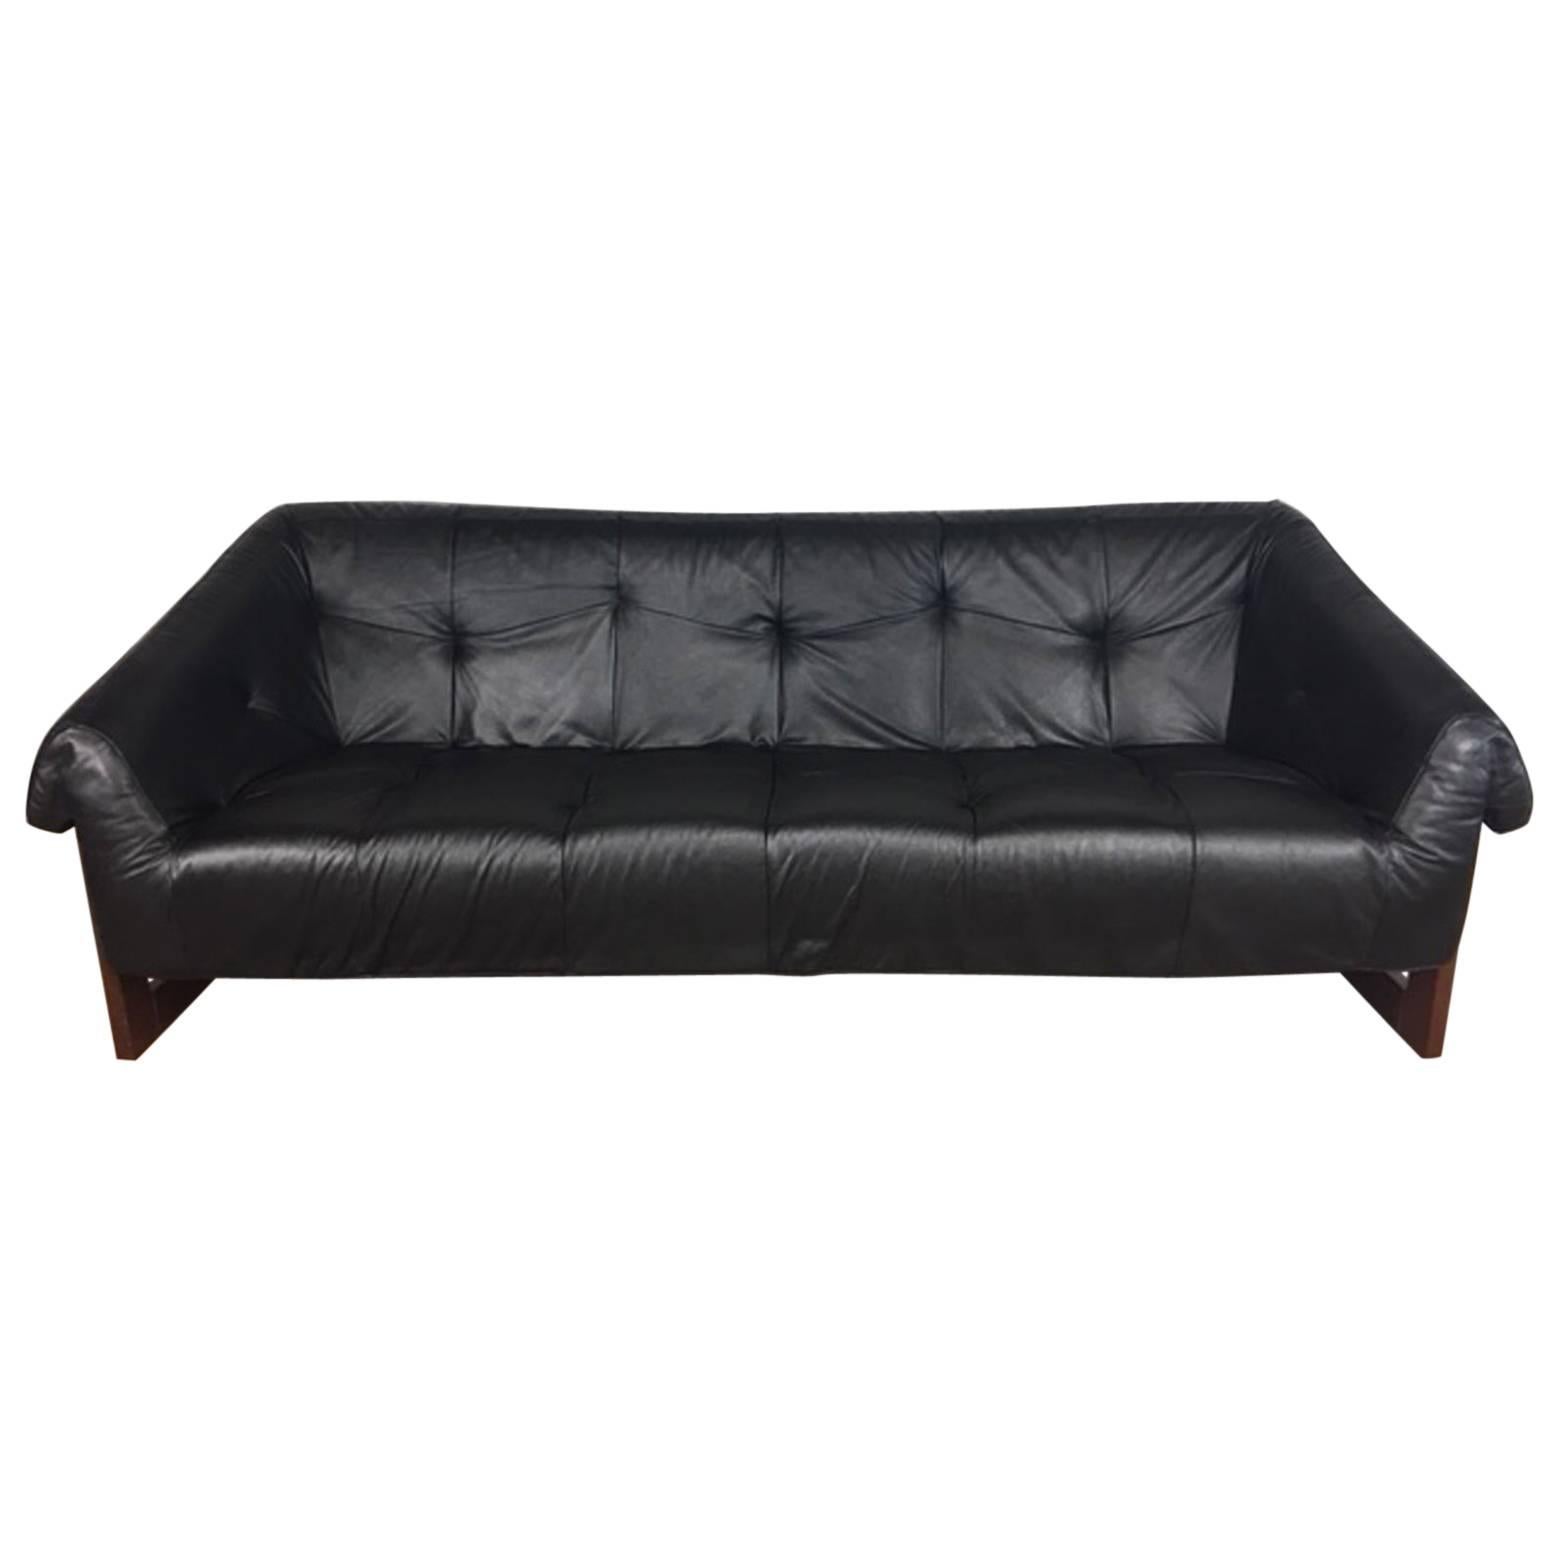 Percival Lafer Leather Sofa For Sale